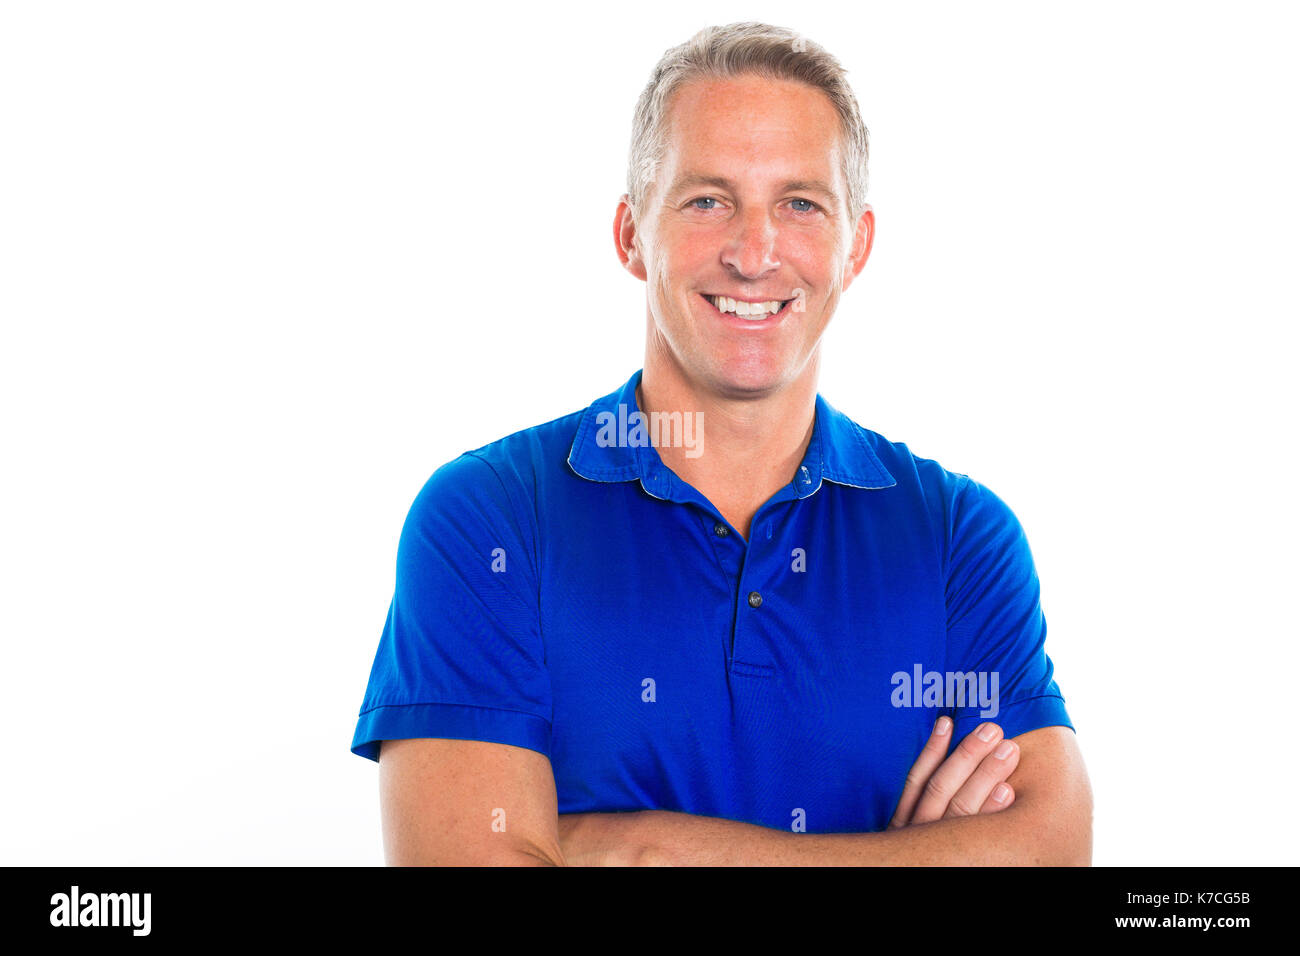 Portrait of young man standing on white background Banque D'Images